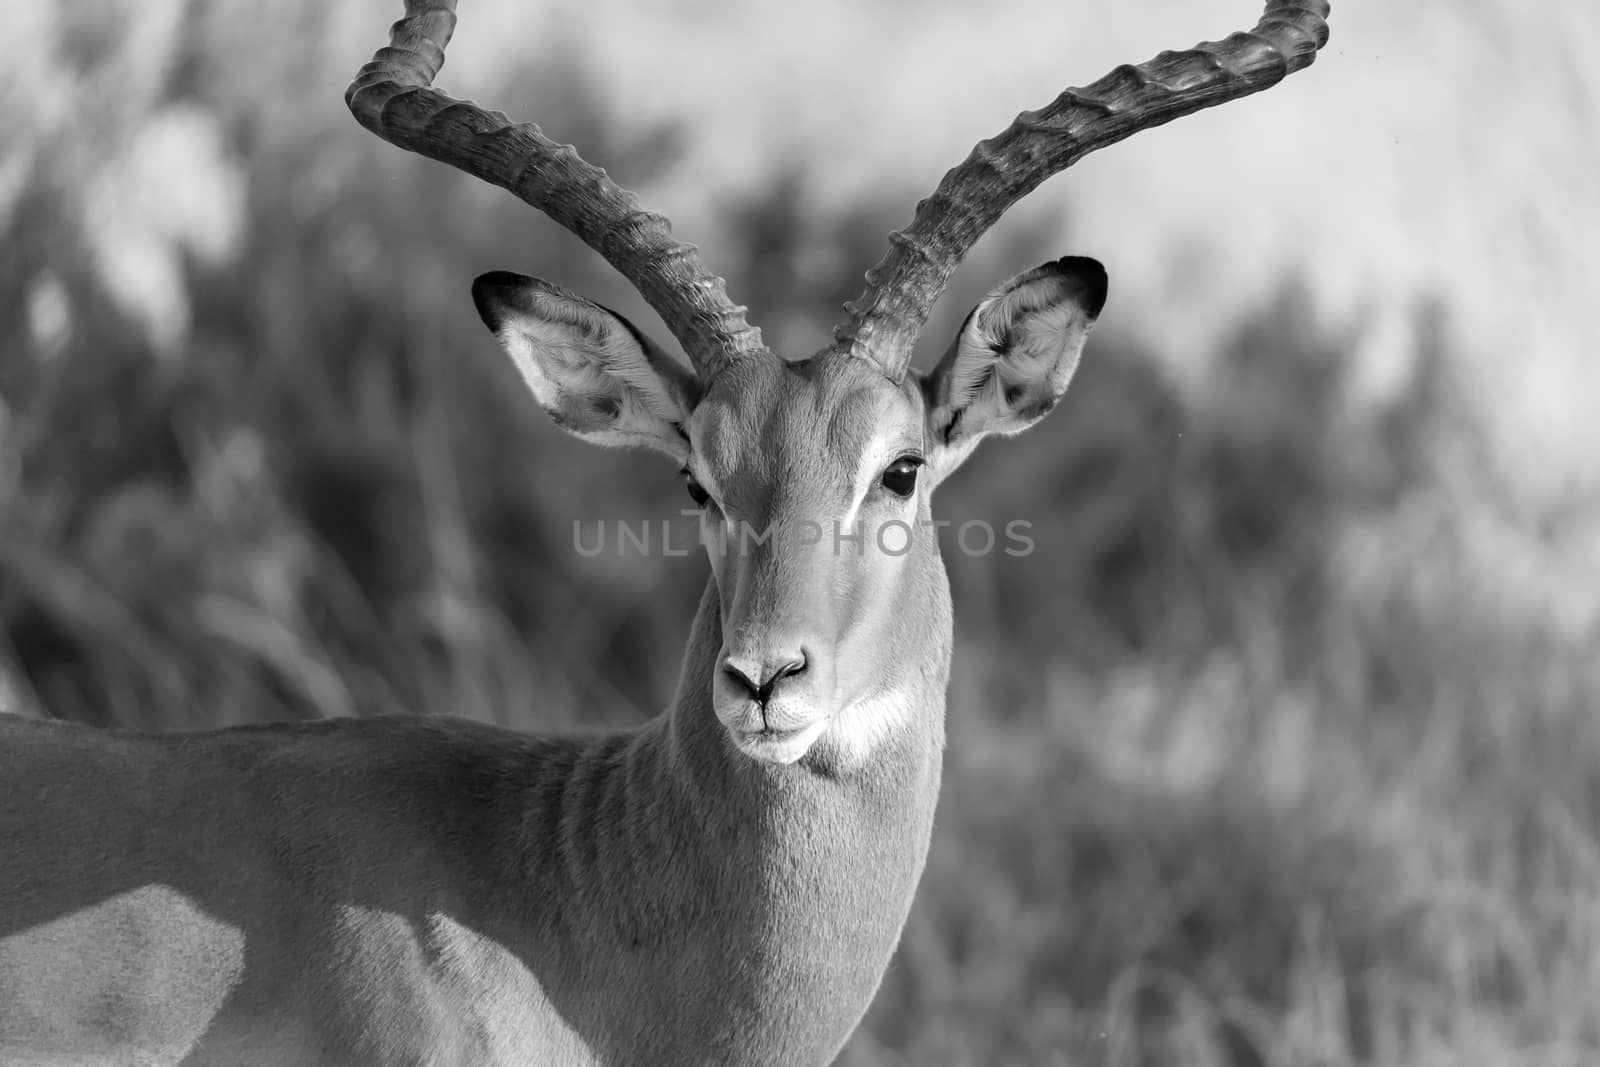 A portrait of an Impala antelope in the savannah of Kenya by 25ehaag6